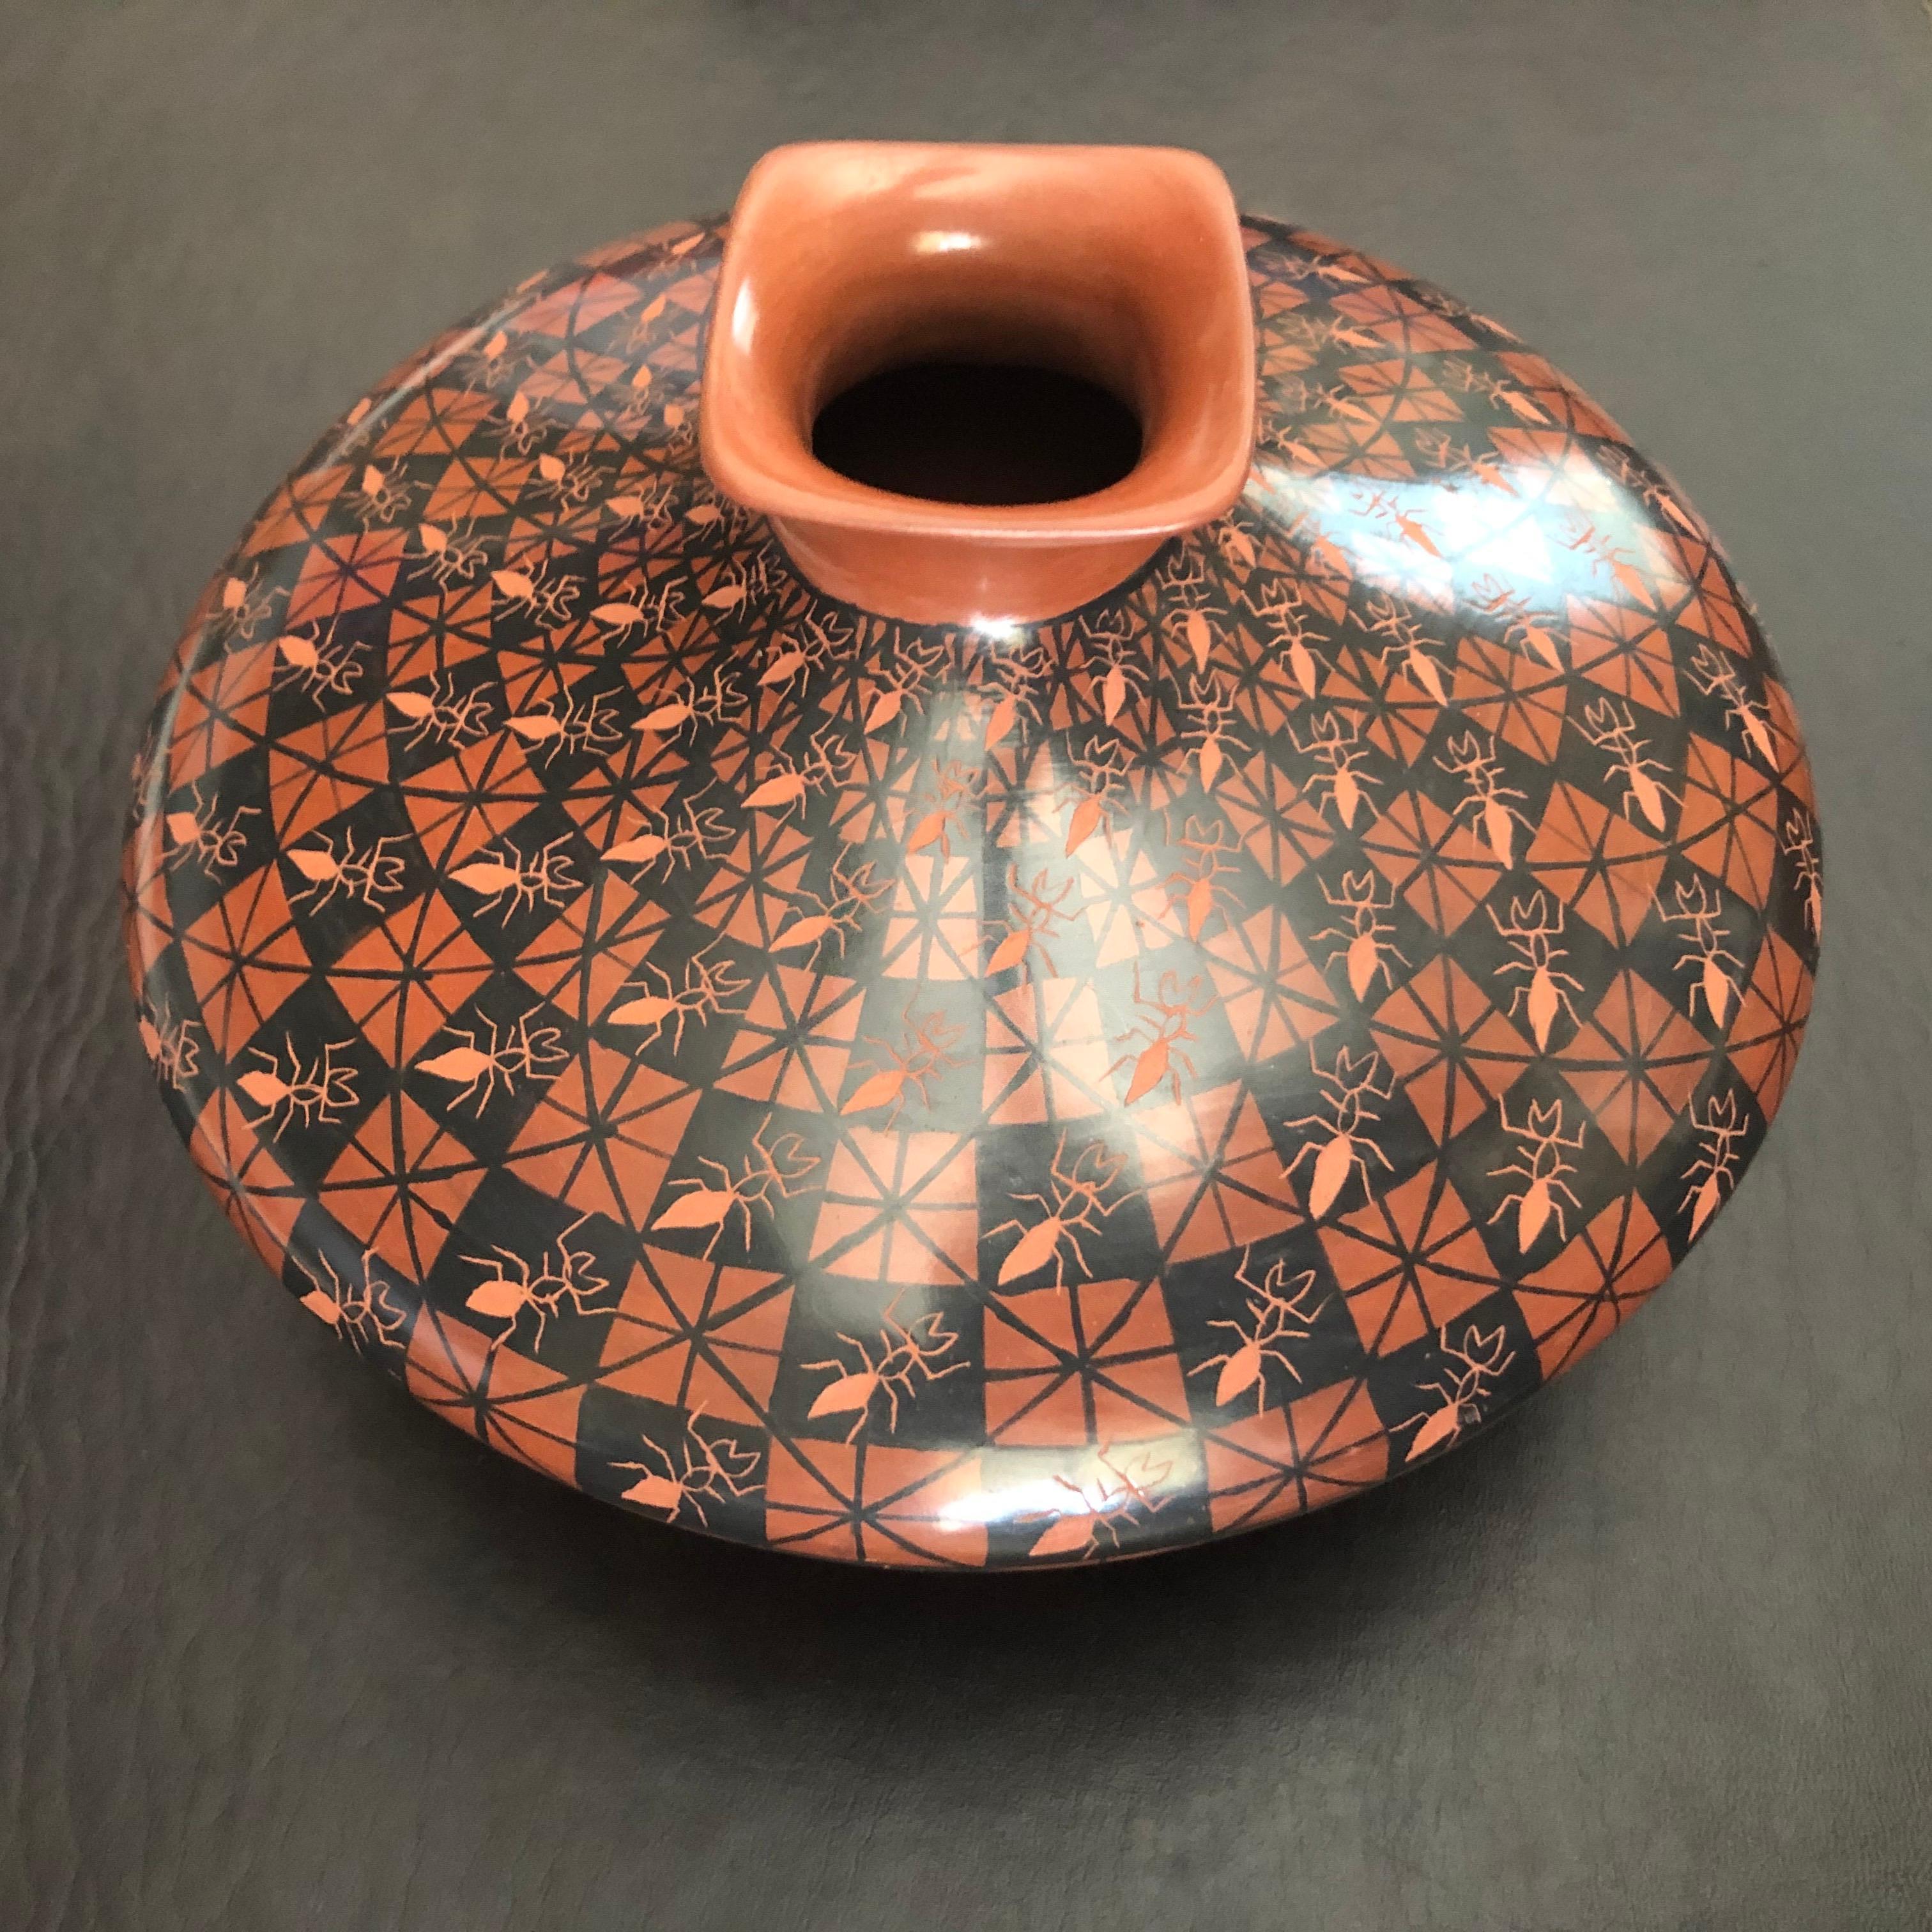 Beautiful hand-turned polychrome Mata Ortiz ant motif vase / seed jar by Yoly Ledezma, circa 1990s. The exquisite piece has wonderful design and color and is exquisitely turned.

Mata Ortiz or Casas Grandes pottery comes from the small village of